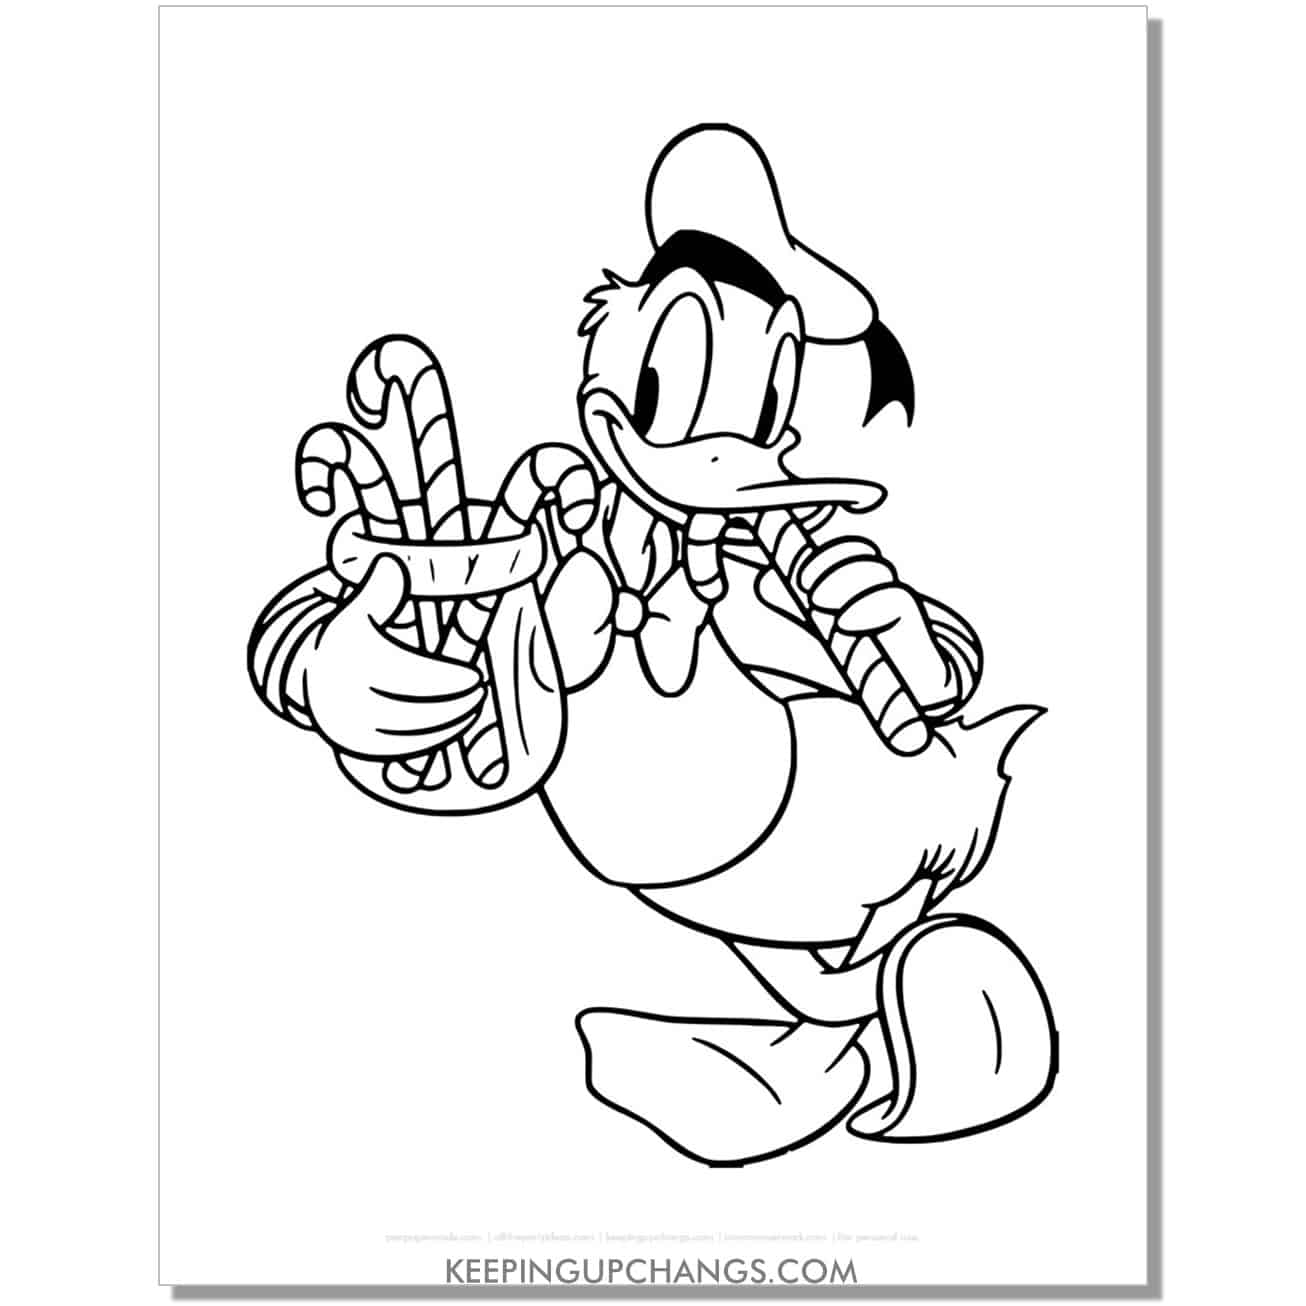 free donald duck and candy cane jar coloring page, sheet.